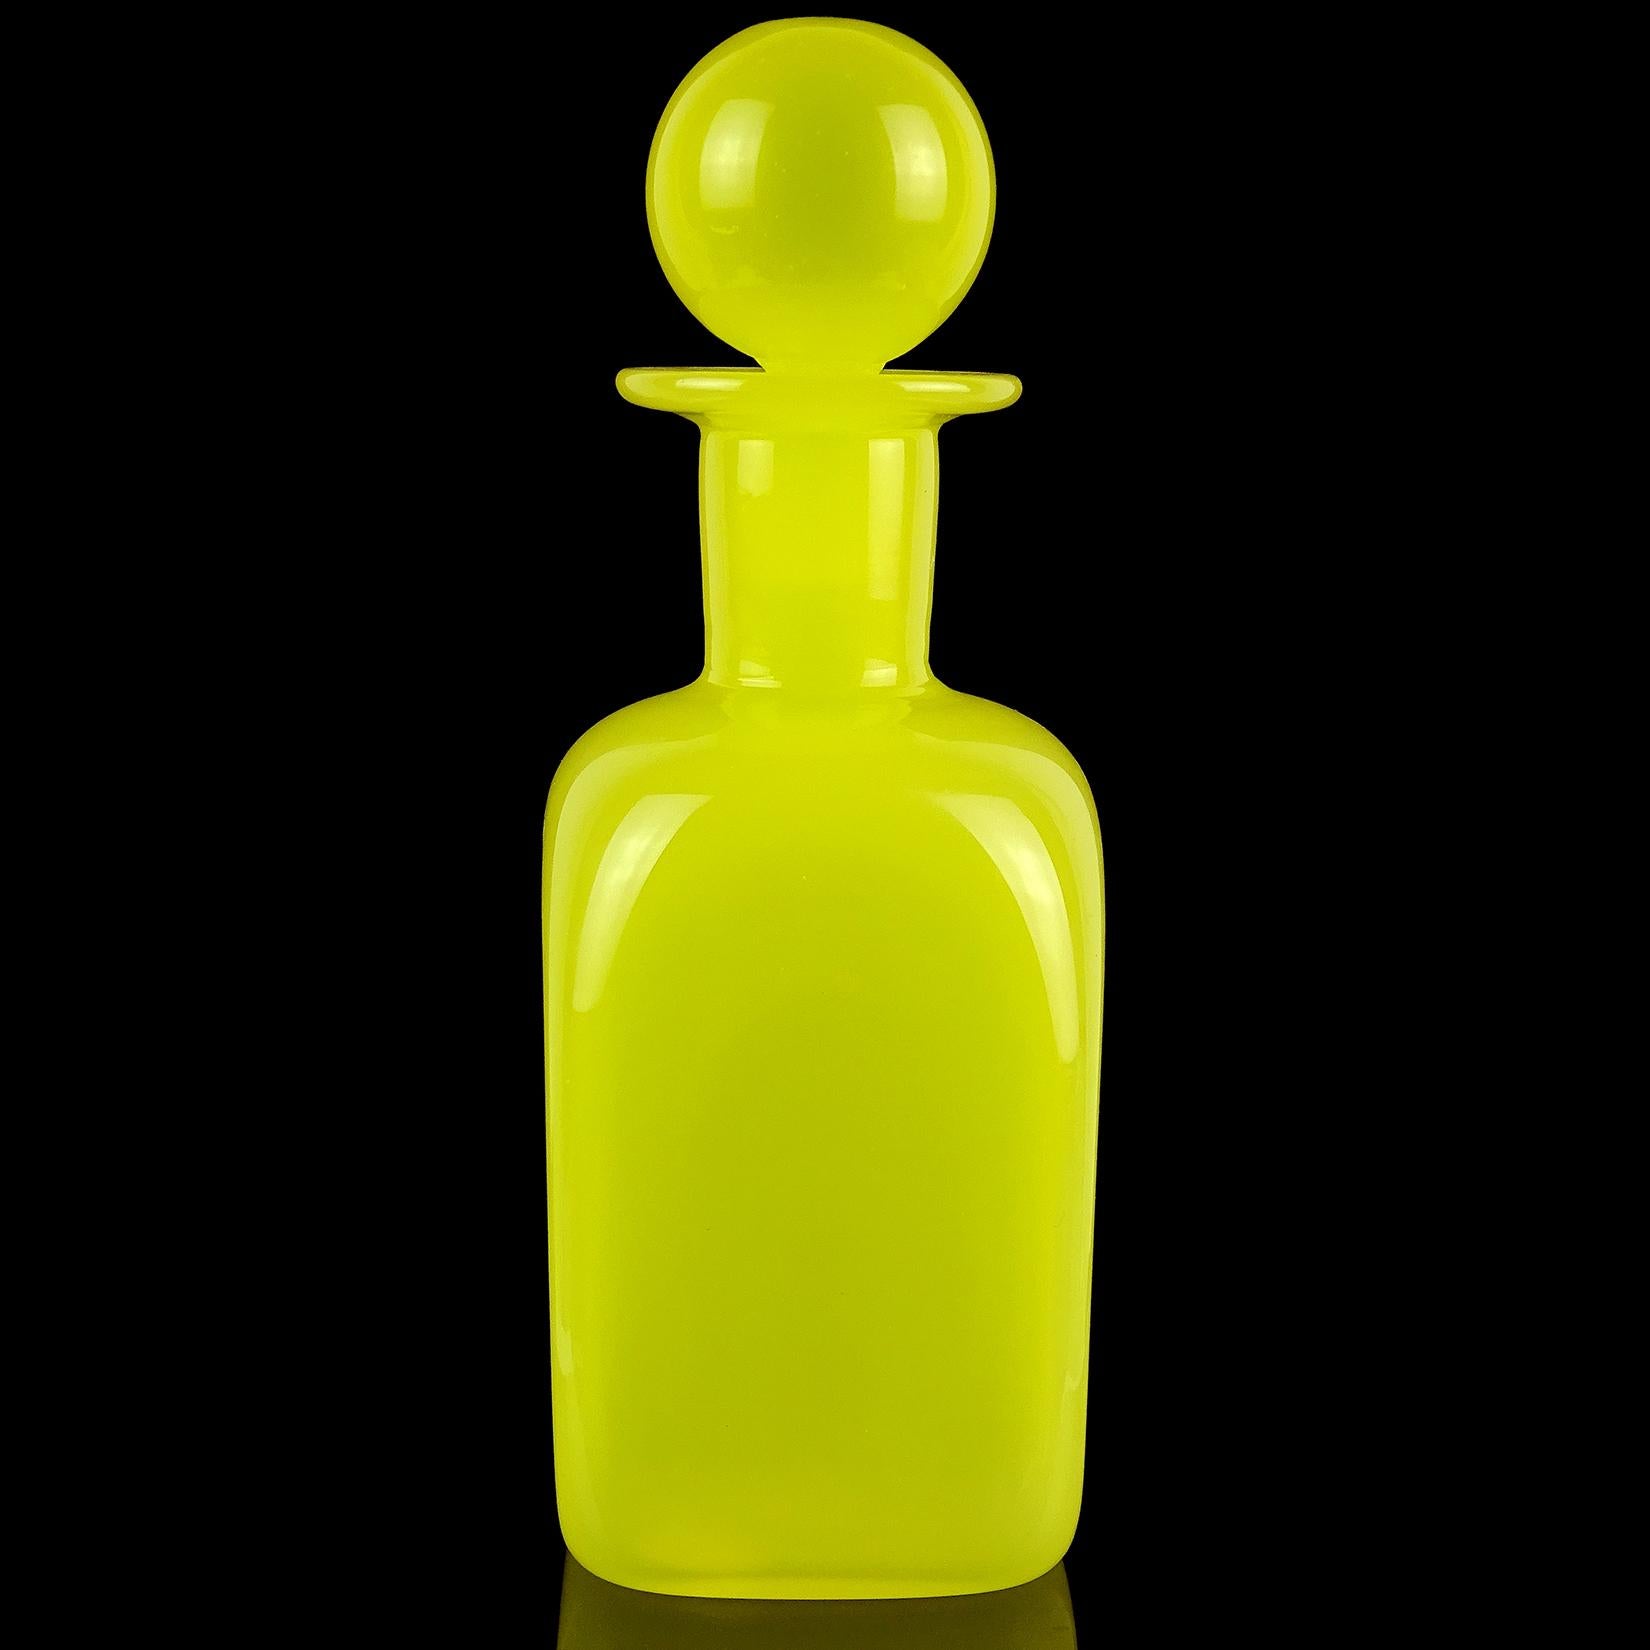 Beautiful Murano hand blown bright yellow Italian art glass decanter / bottle, with original stopper. Documented to designer Archimede Seguso. It has 2 original labels still attached, including 